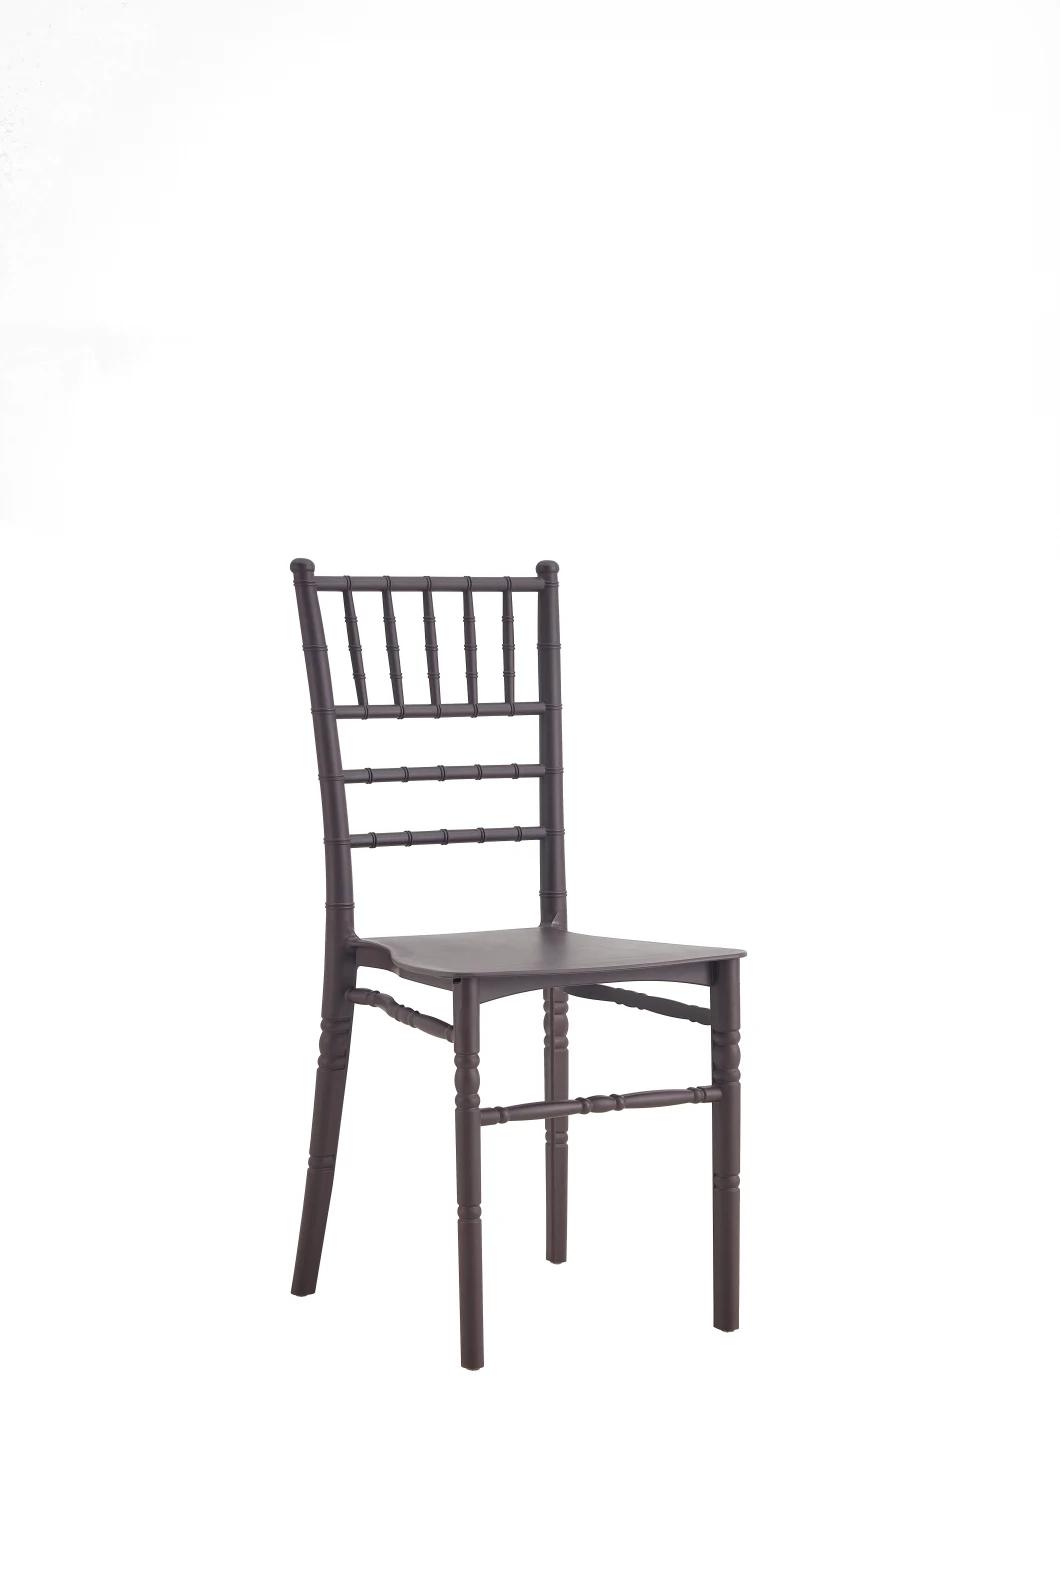 Wholesale Factory Price New Design Portable Dining Garden Stackable Chair, Outdoor White Plastic Chair